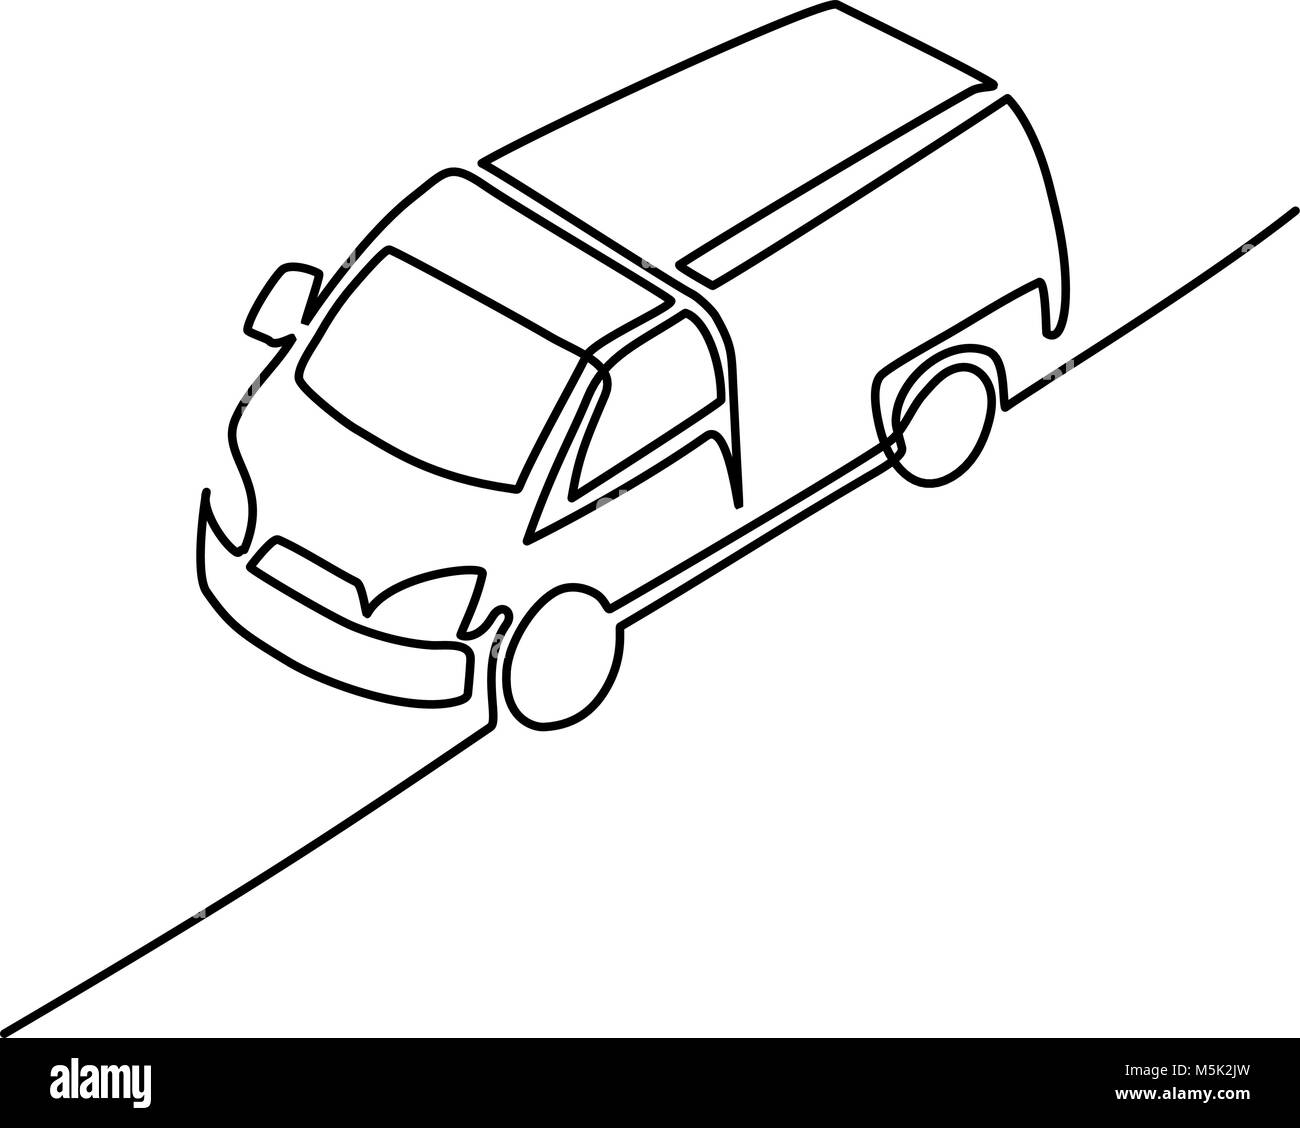 Continuous line isometric drawing. Pickup truck Stock Vector